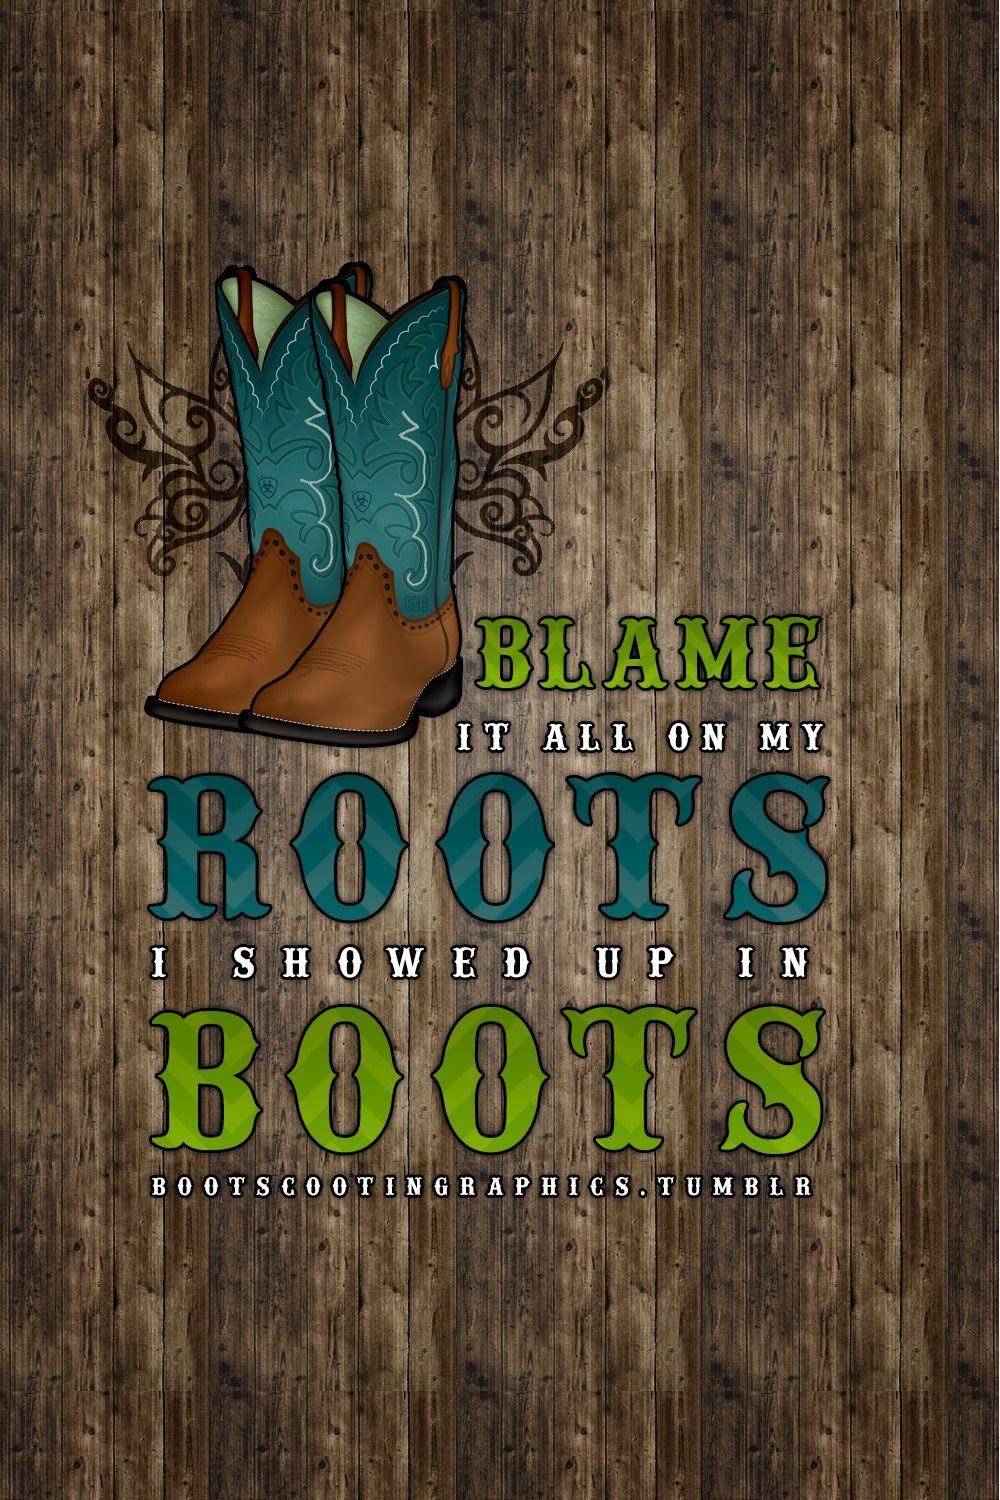 Boot Scootin' Graphics. Country girl quotes, Country girls, Girl wallpaper for phone